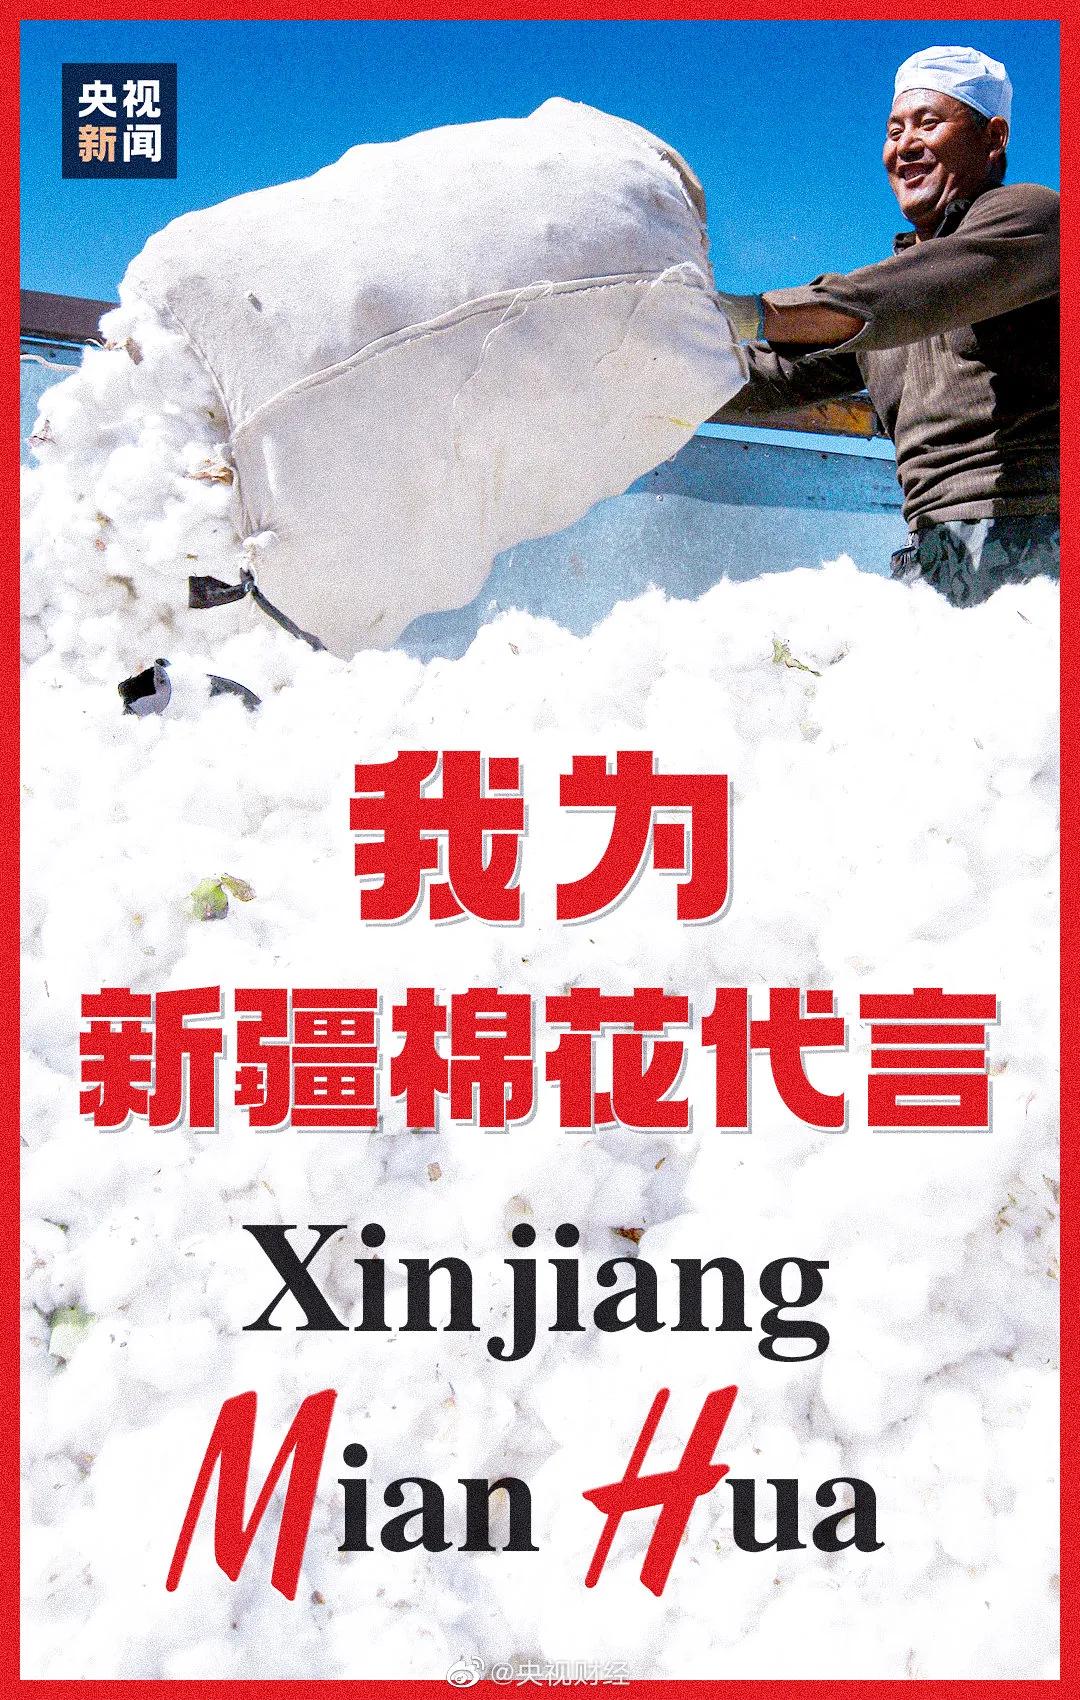 Xinjiang cotton half an year takes protest of epidemic situation of international of 3 million tons of brunt, why to feel black Xinjiang cotton